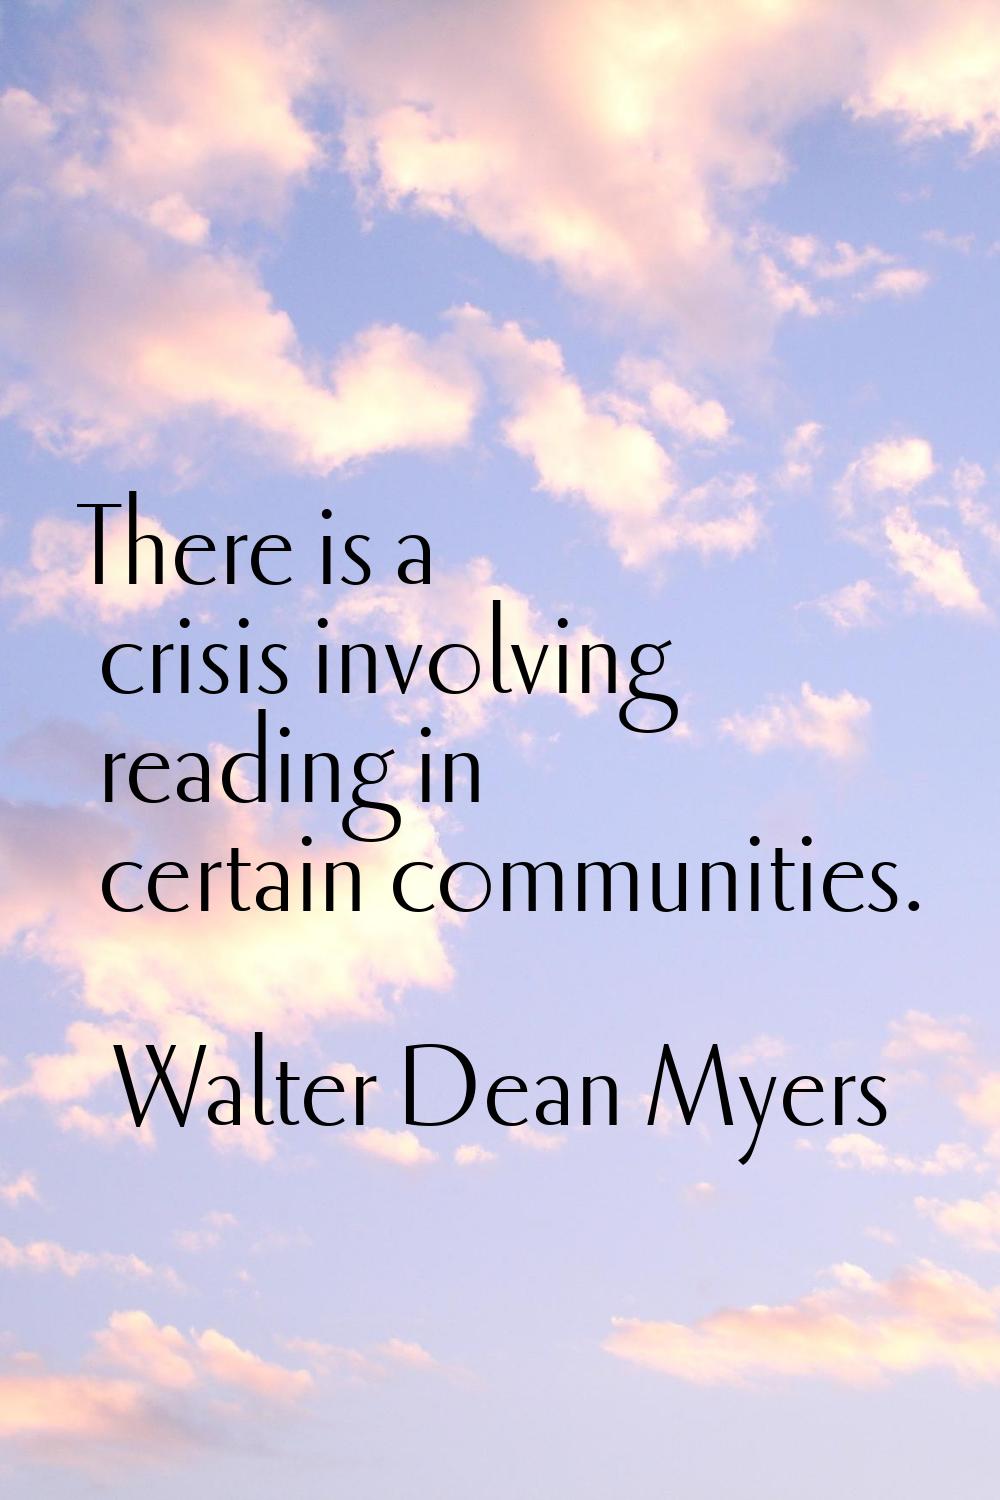 There is a crisis involving reading in certain communities.